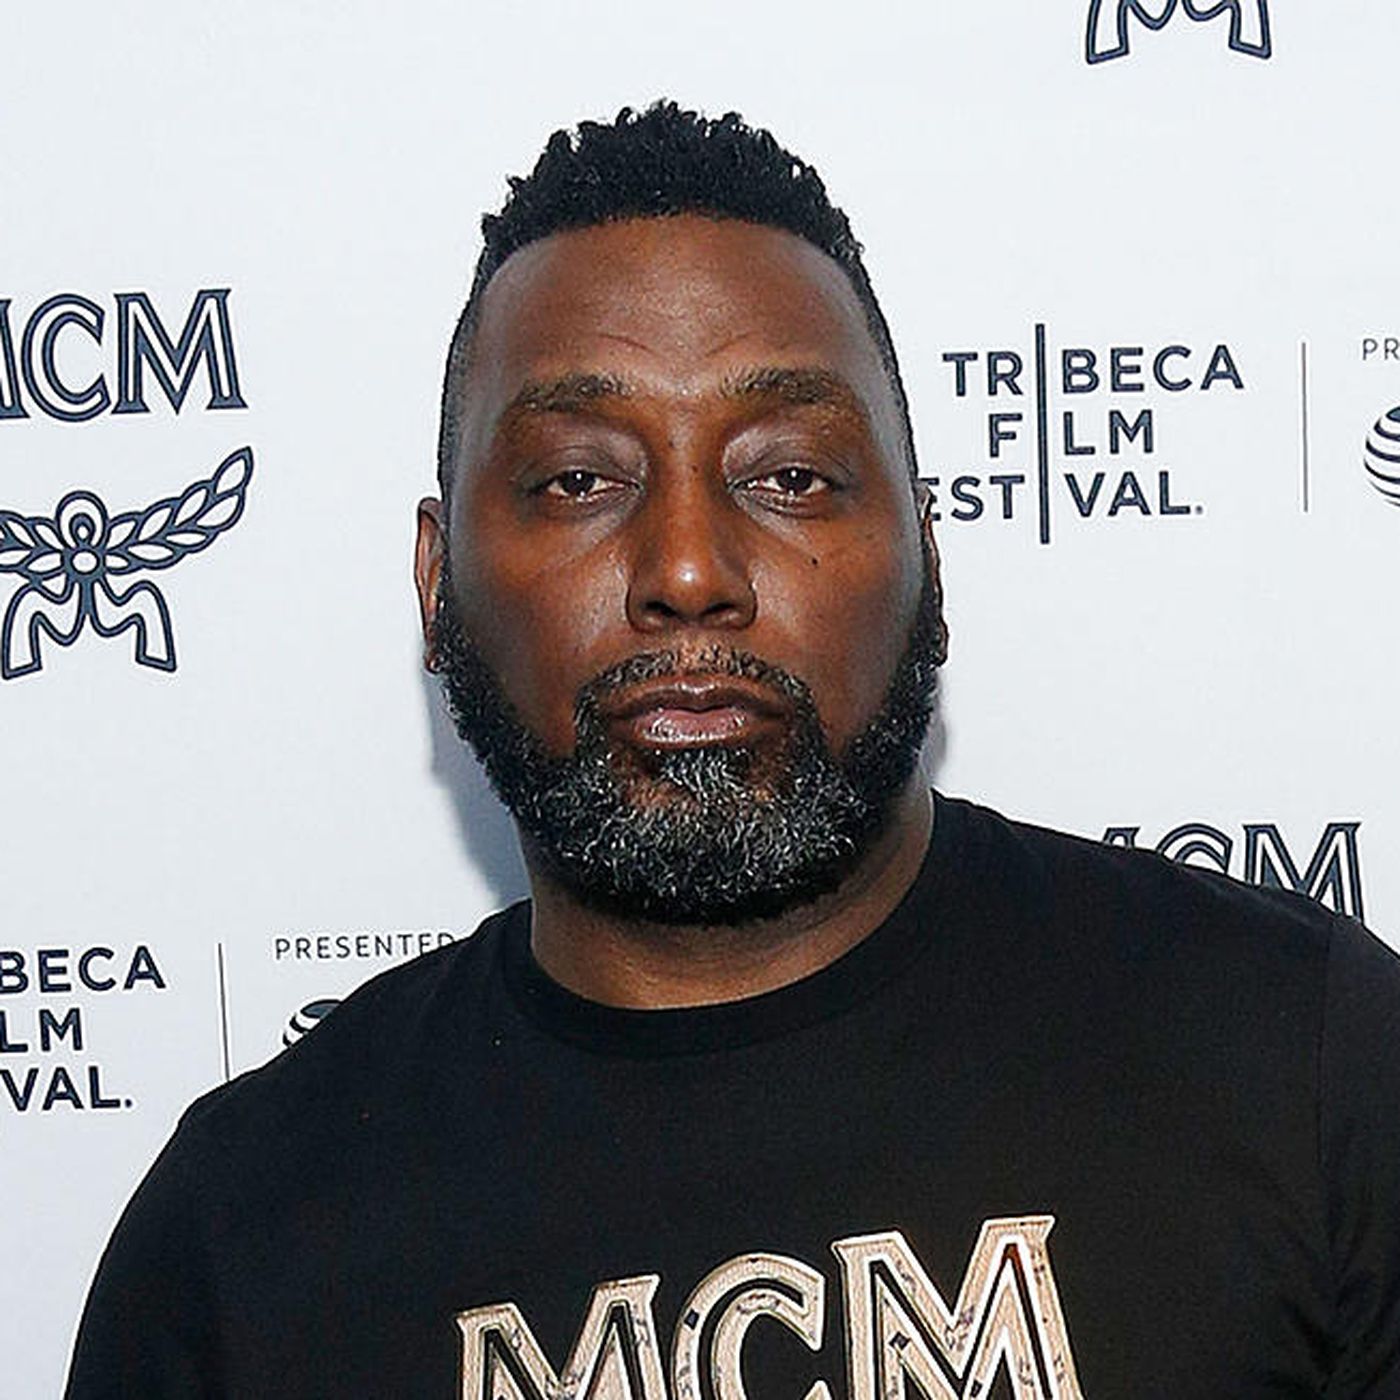 The 53-year old son of father (?) and mother(?) Big Daddy Kane in 2022 photo. Big Daddy Kane earned a  million dollar salary - leaving the net worth at  million in 2022